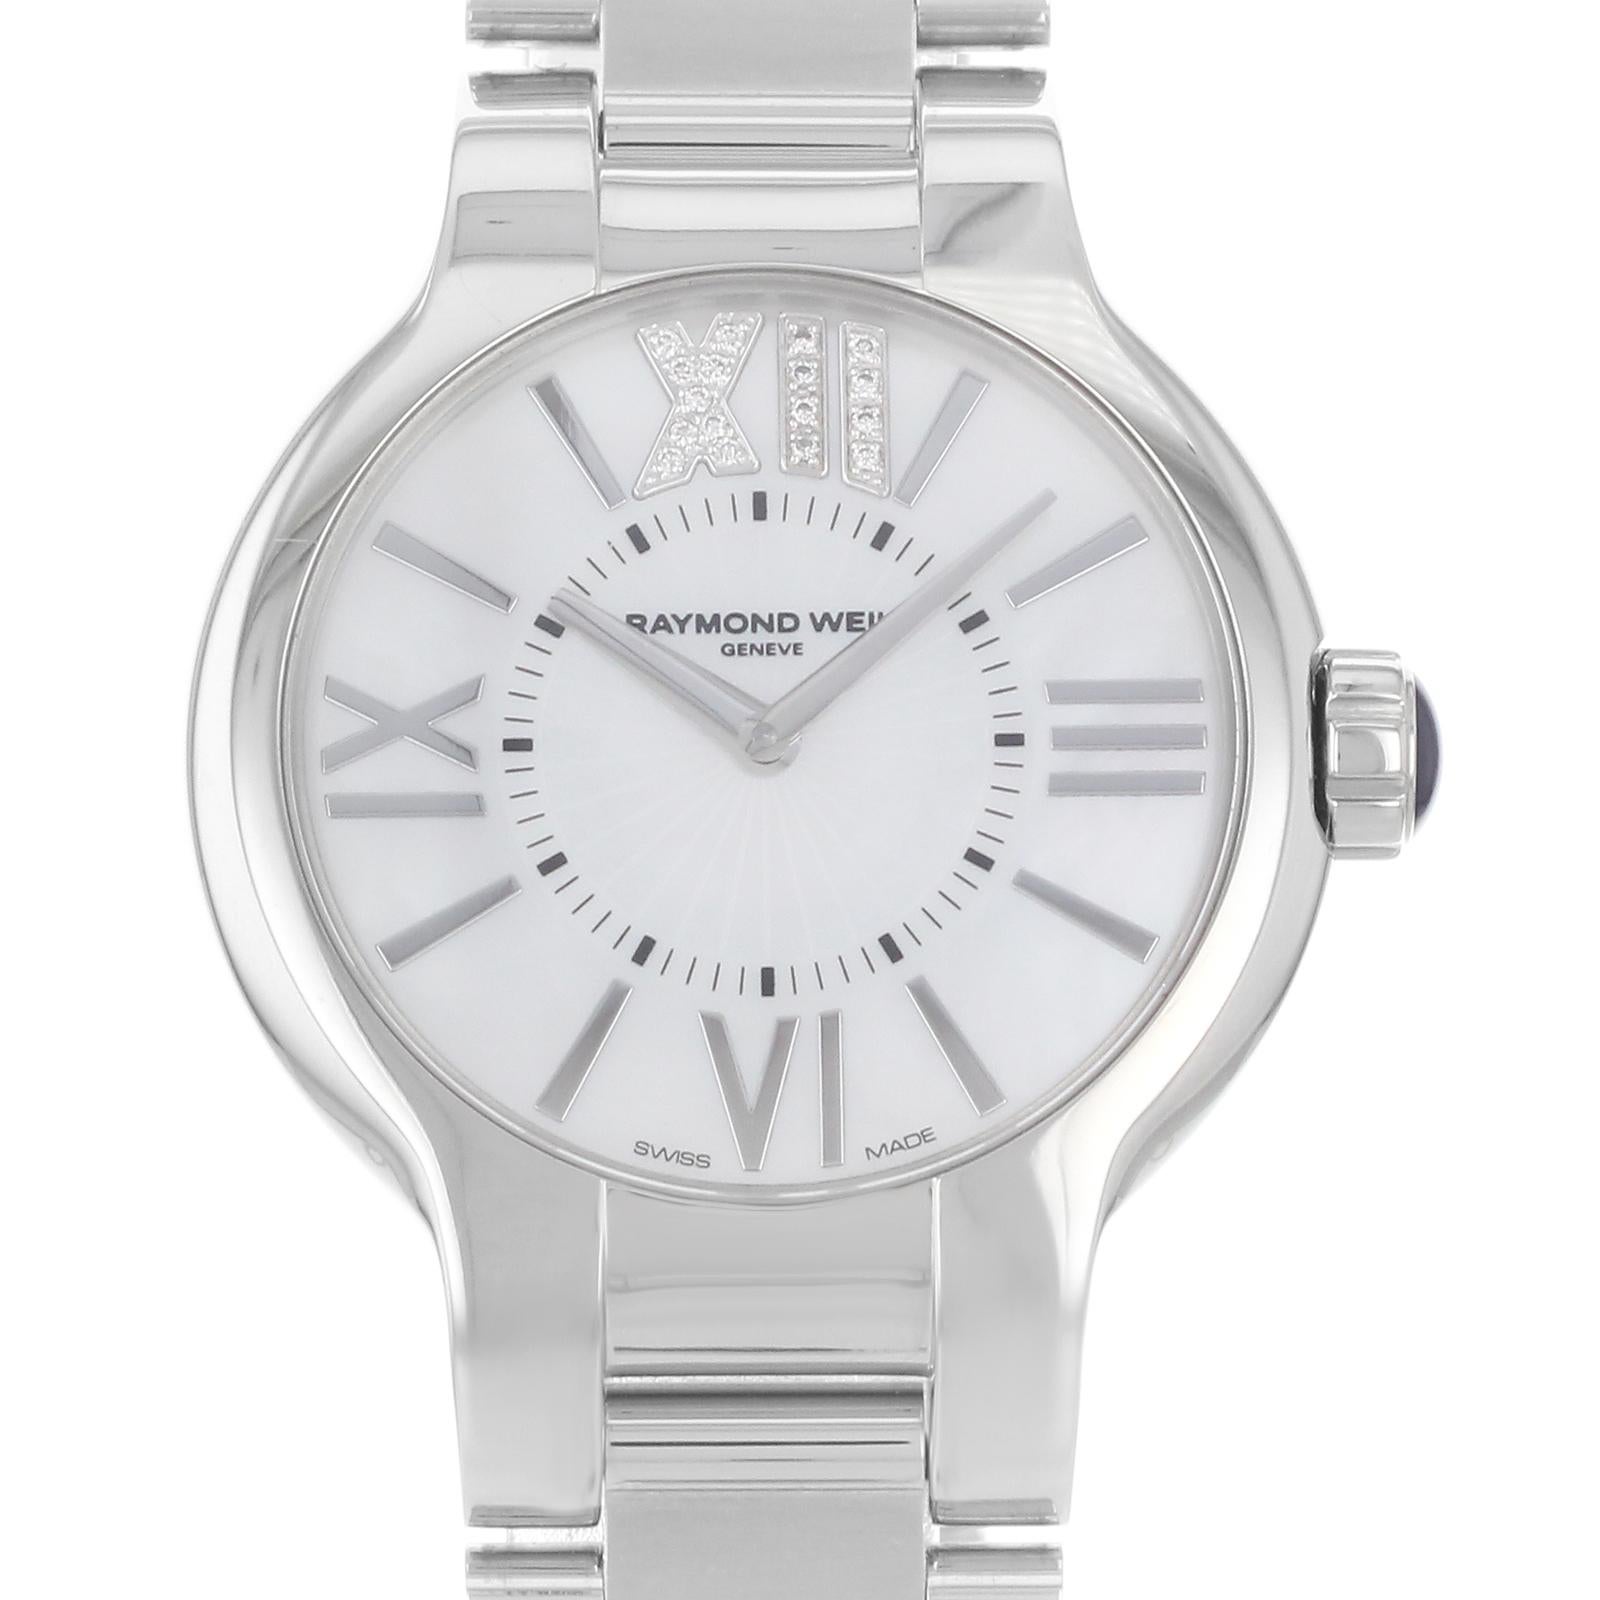 This display model Raymond Weil Noemia 5932-ST-00990 is a beautiful Ladies timepiece that is powered by a quartz movement which is cased in a stainless steel case. It has a round shape face, diamonds dial and has hand sticks & numerals style